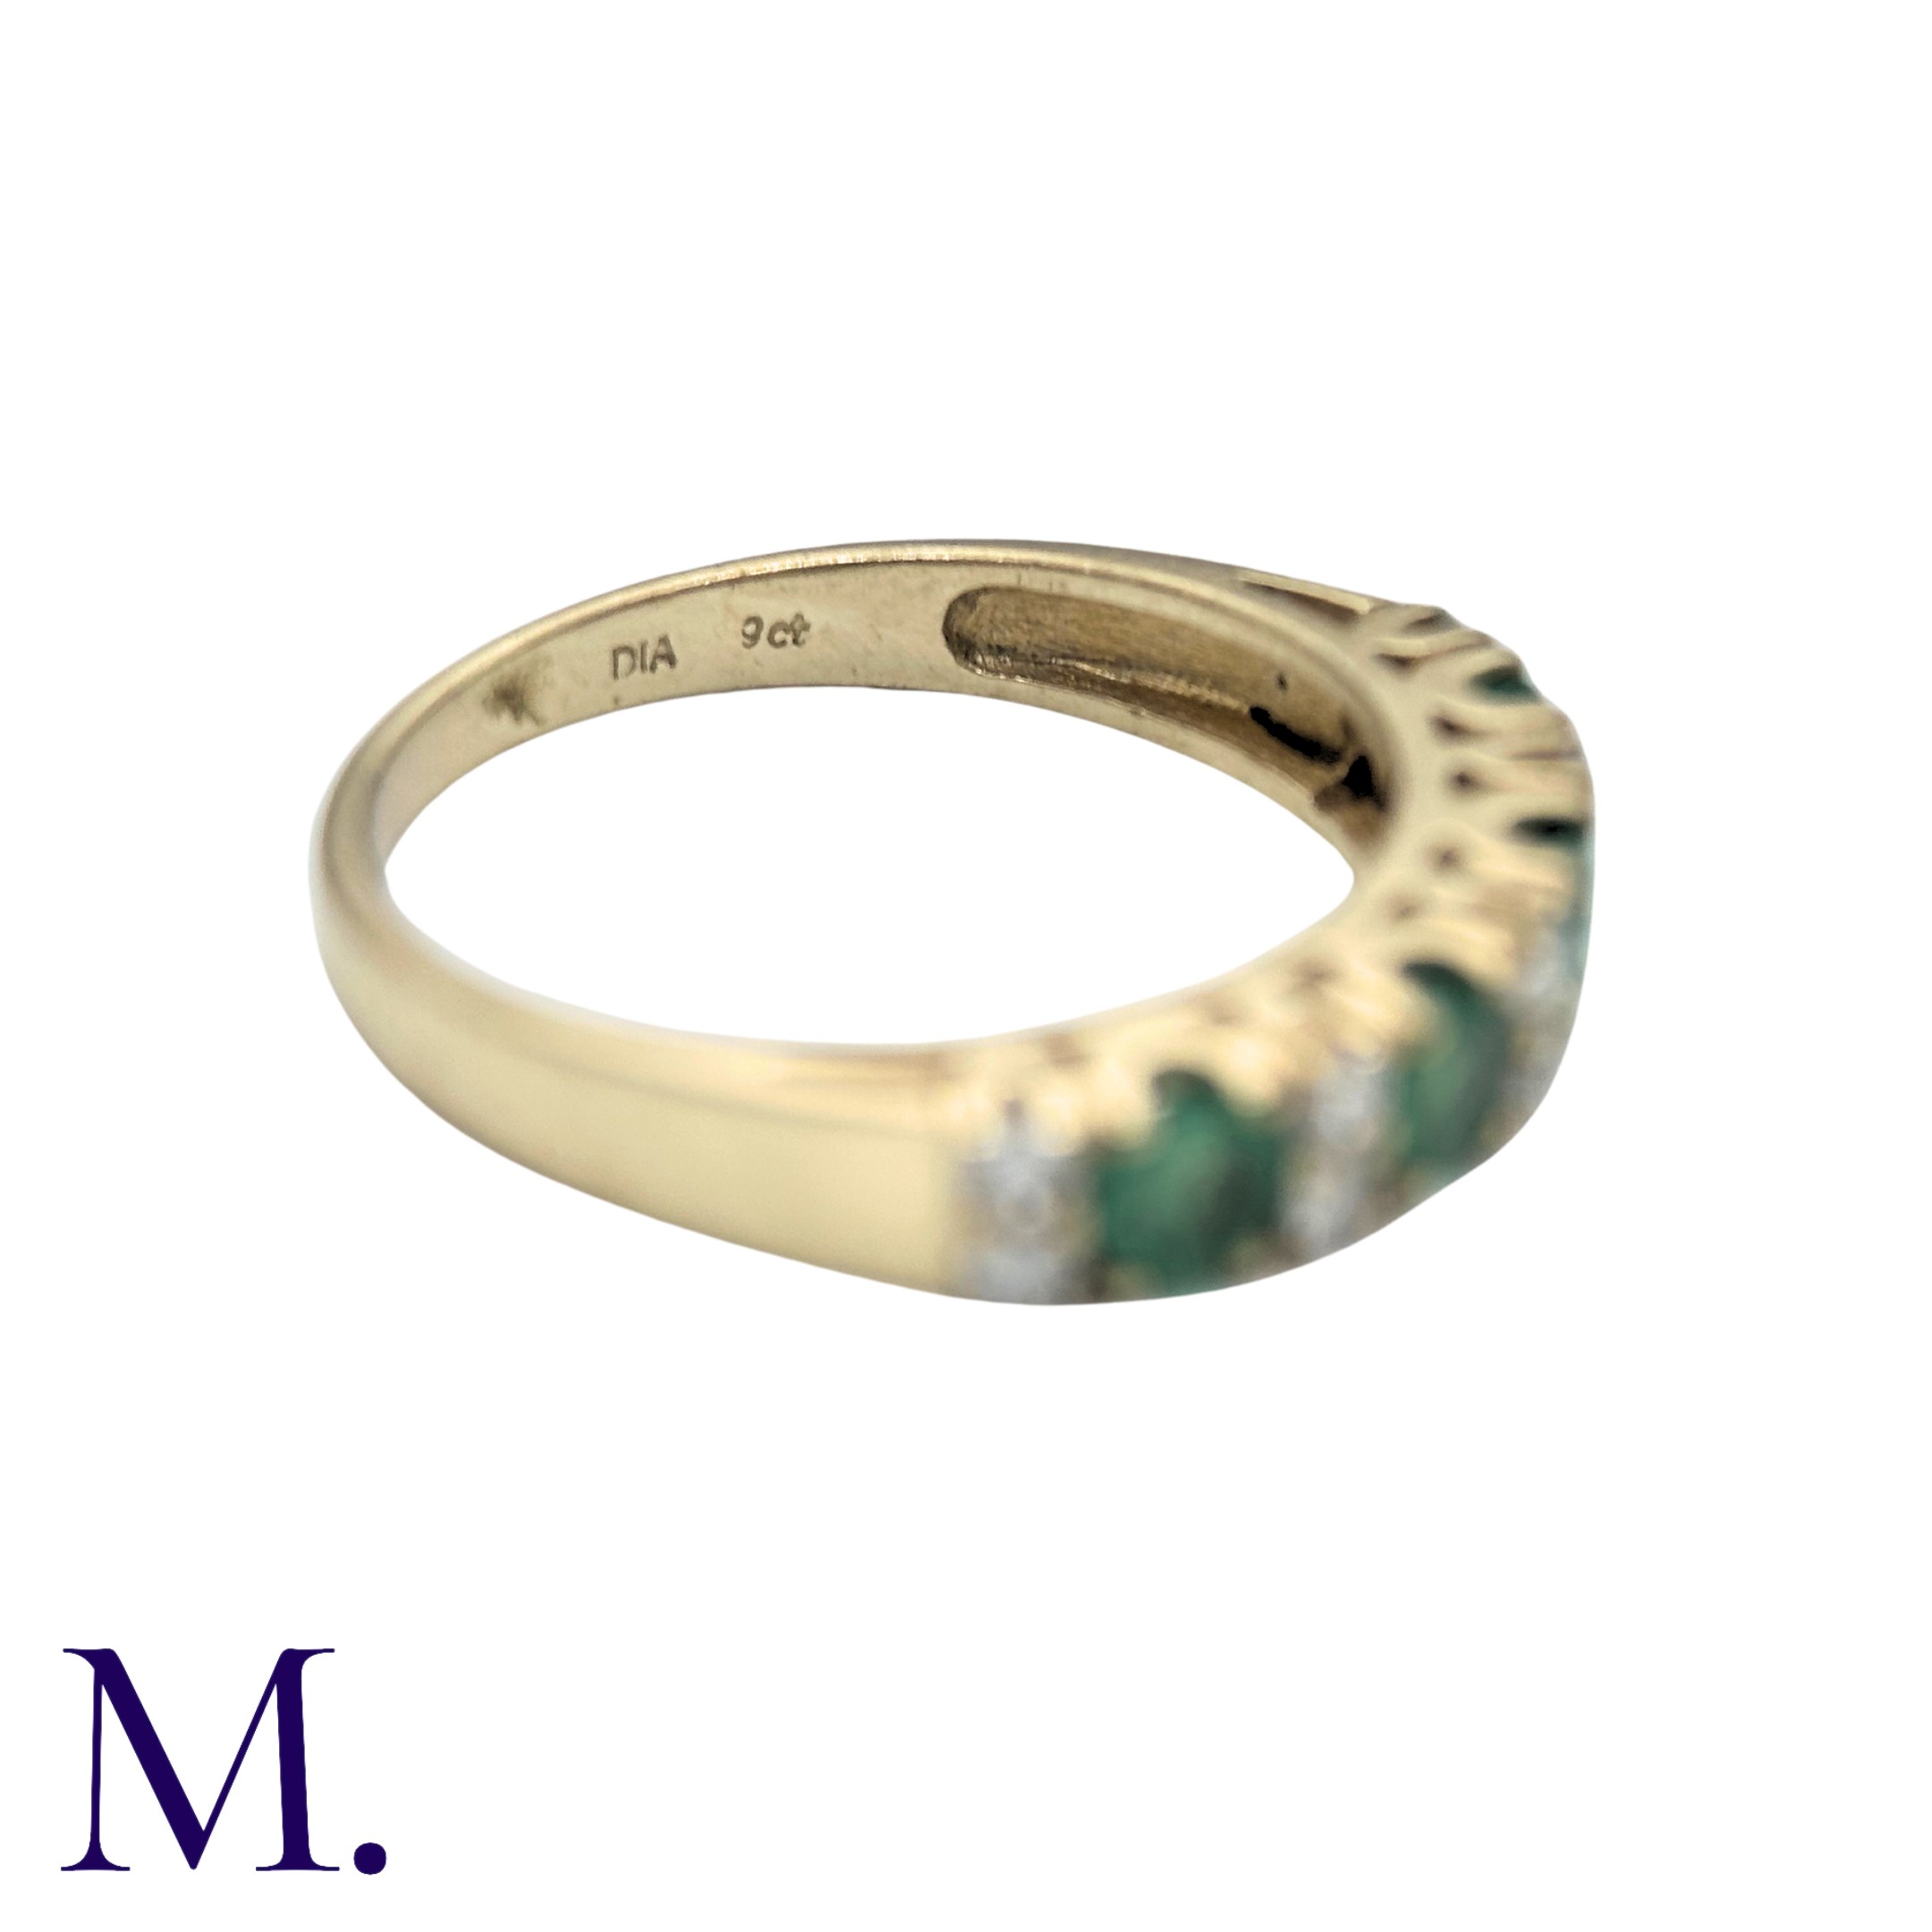 An Emerald And Diamond Ring in 9k yellow gold, set with four round cut emeralds punctuated with - Image 5 of 6